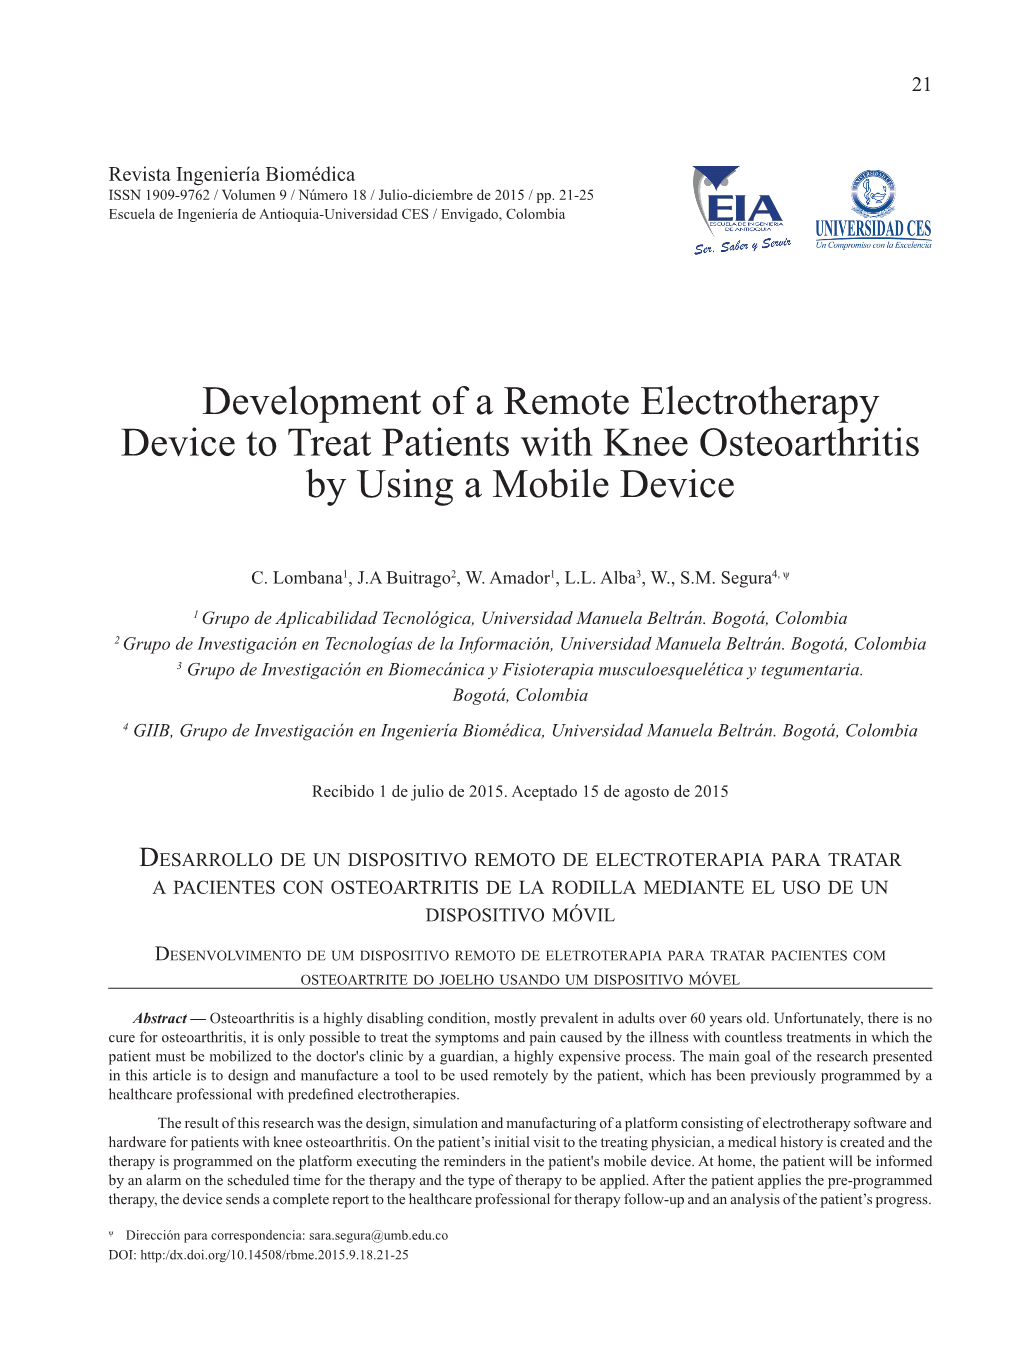 Development of a Remote Electrotherapy Device to Treat Patients with Knee Osteoarthritis by Using a Mobile Device